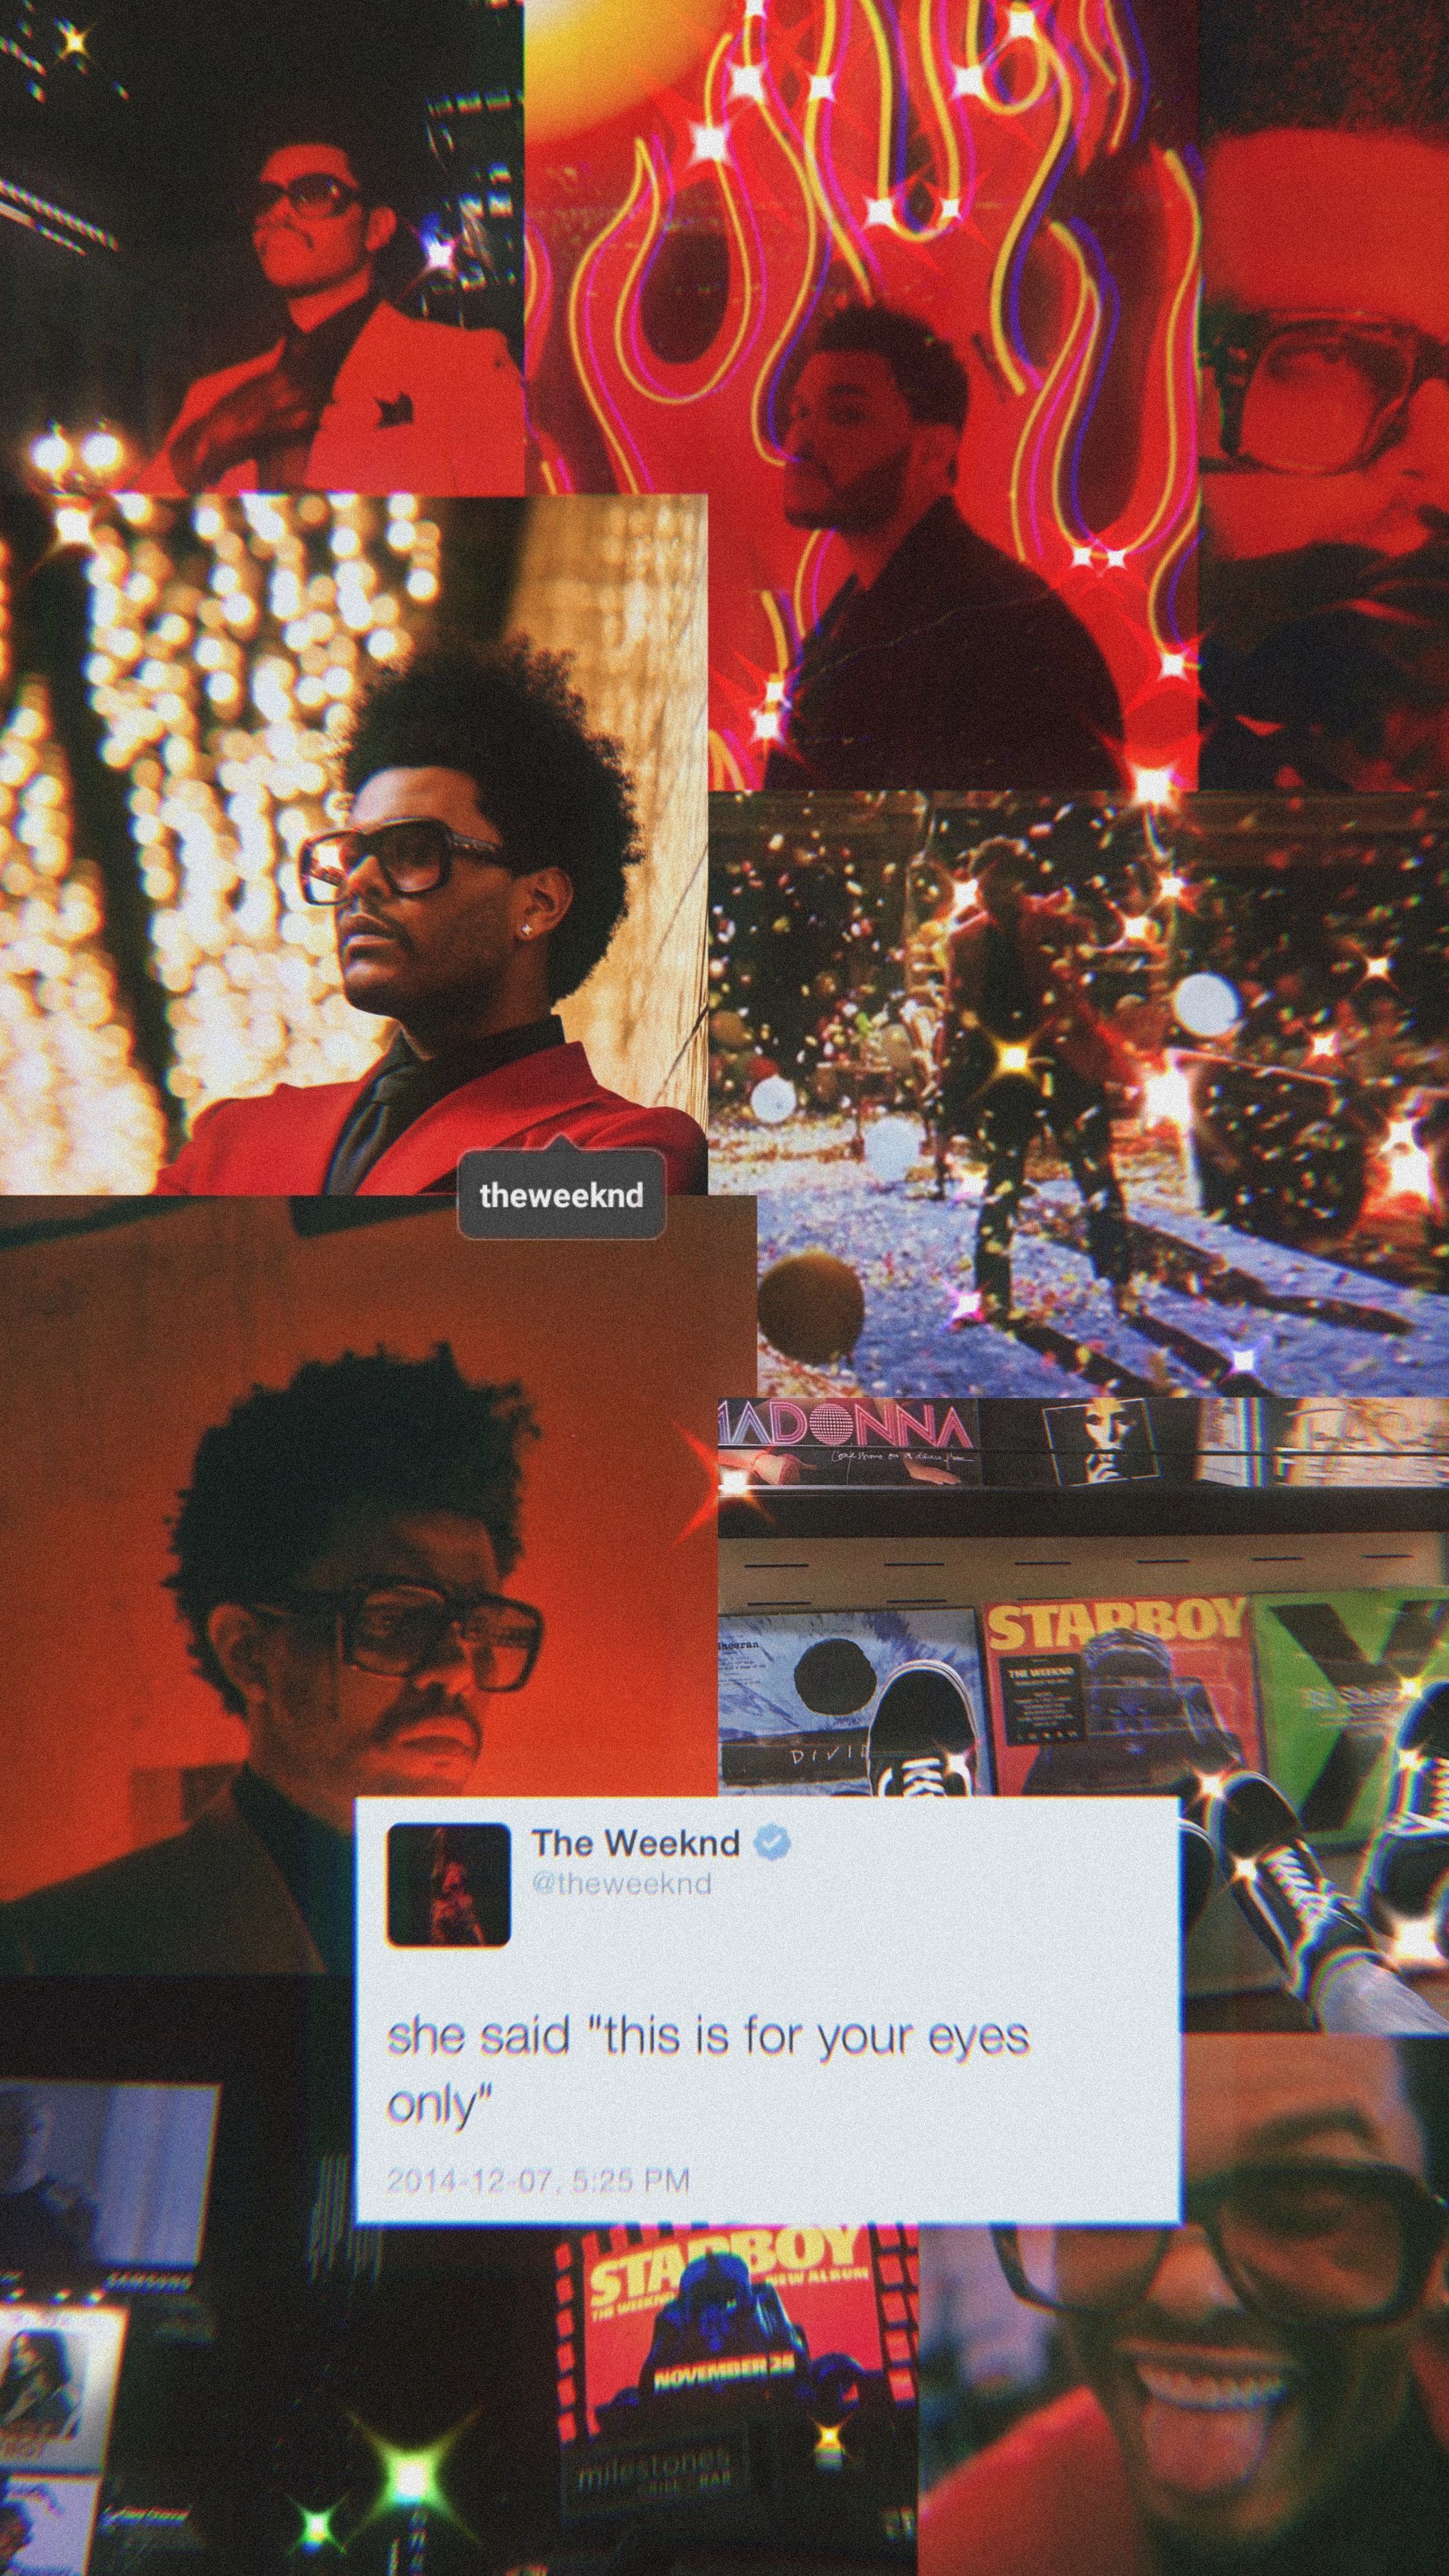 A collage of images of The Weeknd - The Weeknd